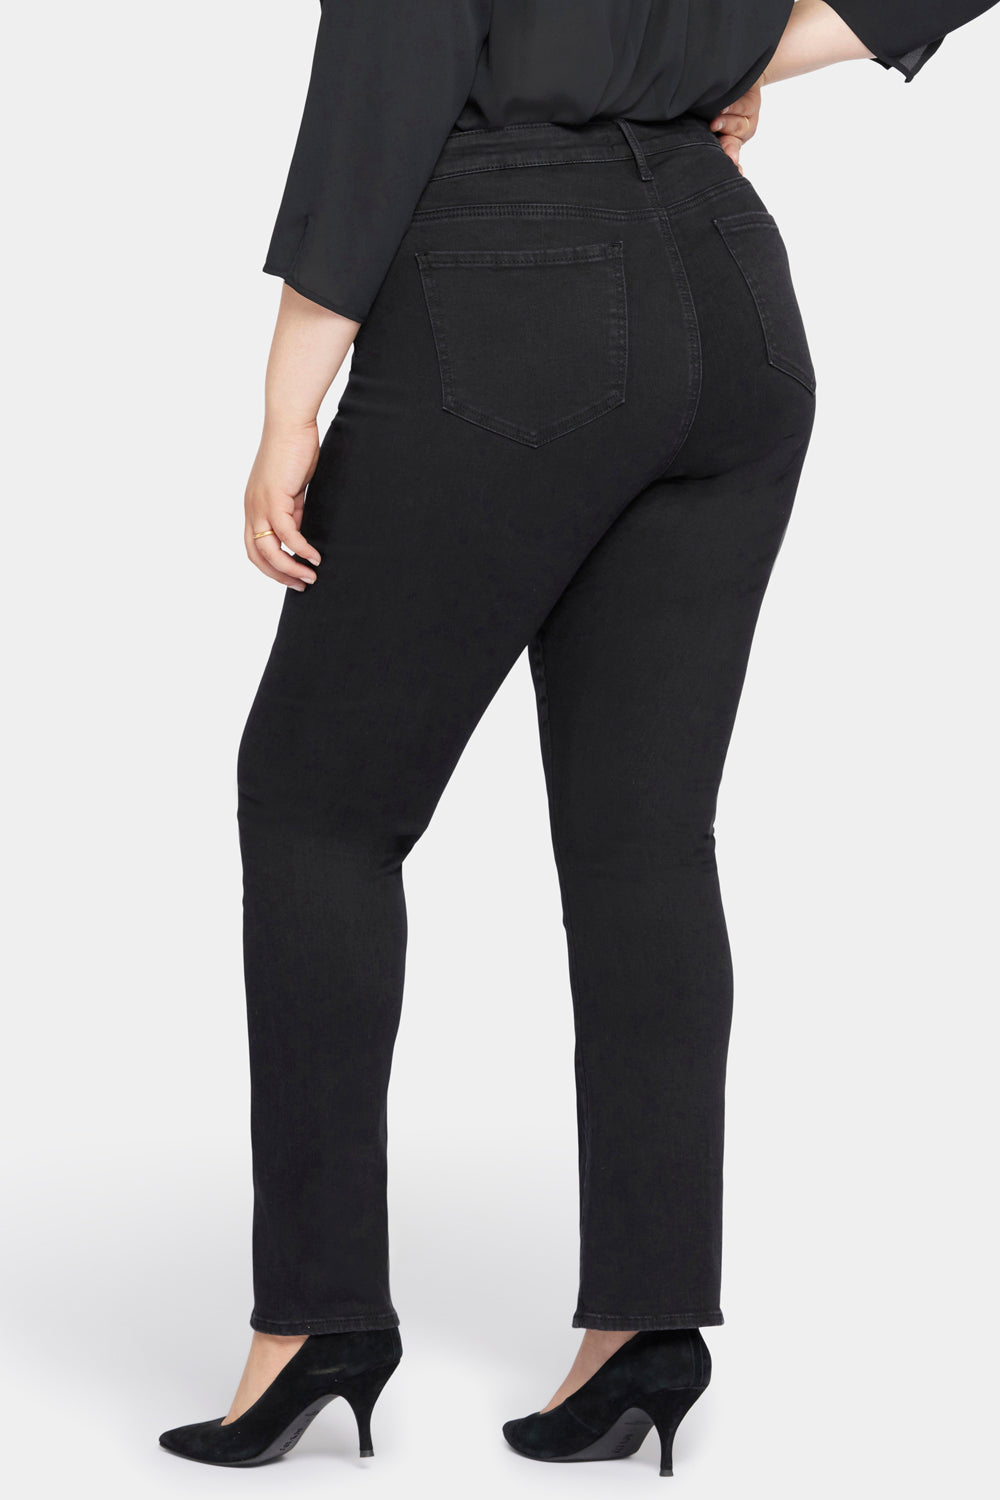 Le Silhouette Slim Bootcut Jeans In Plus Size With High Rise - Stellar Black